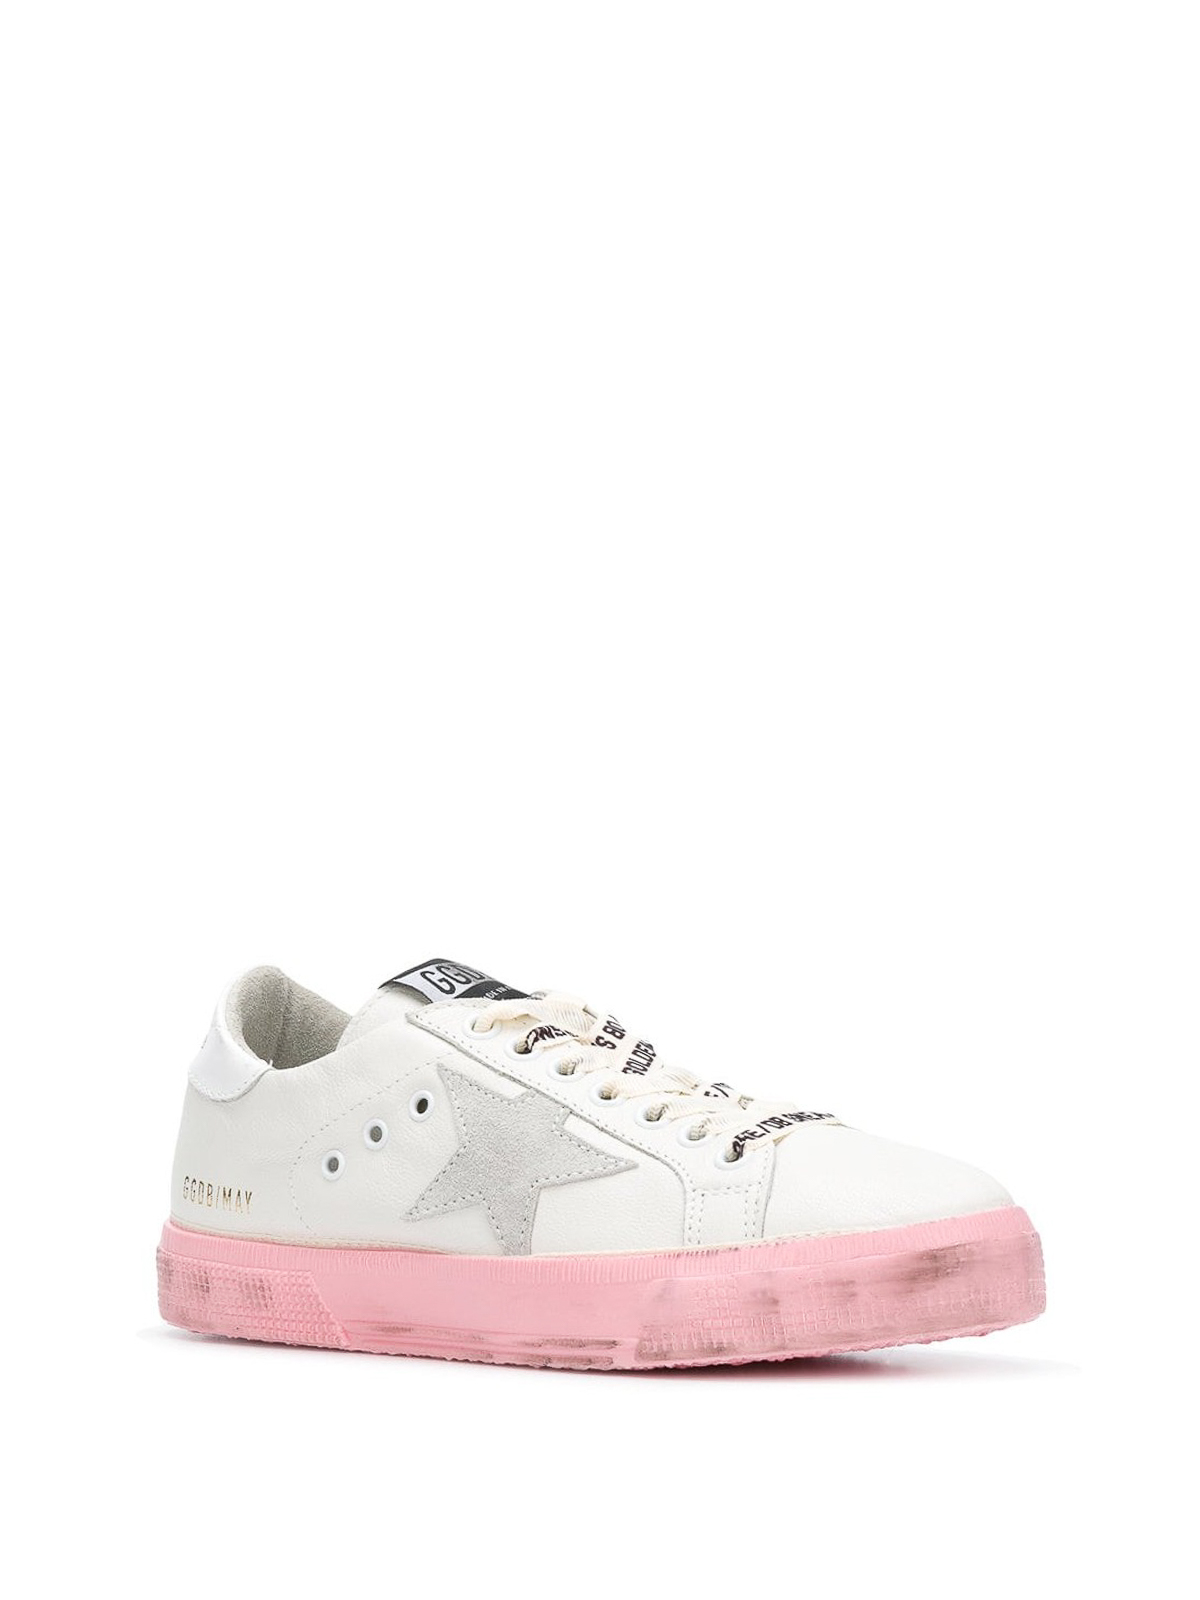 pink sole sneakers